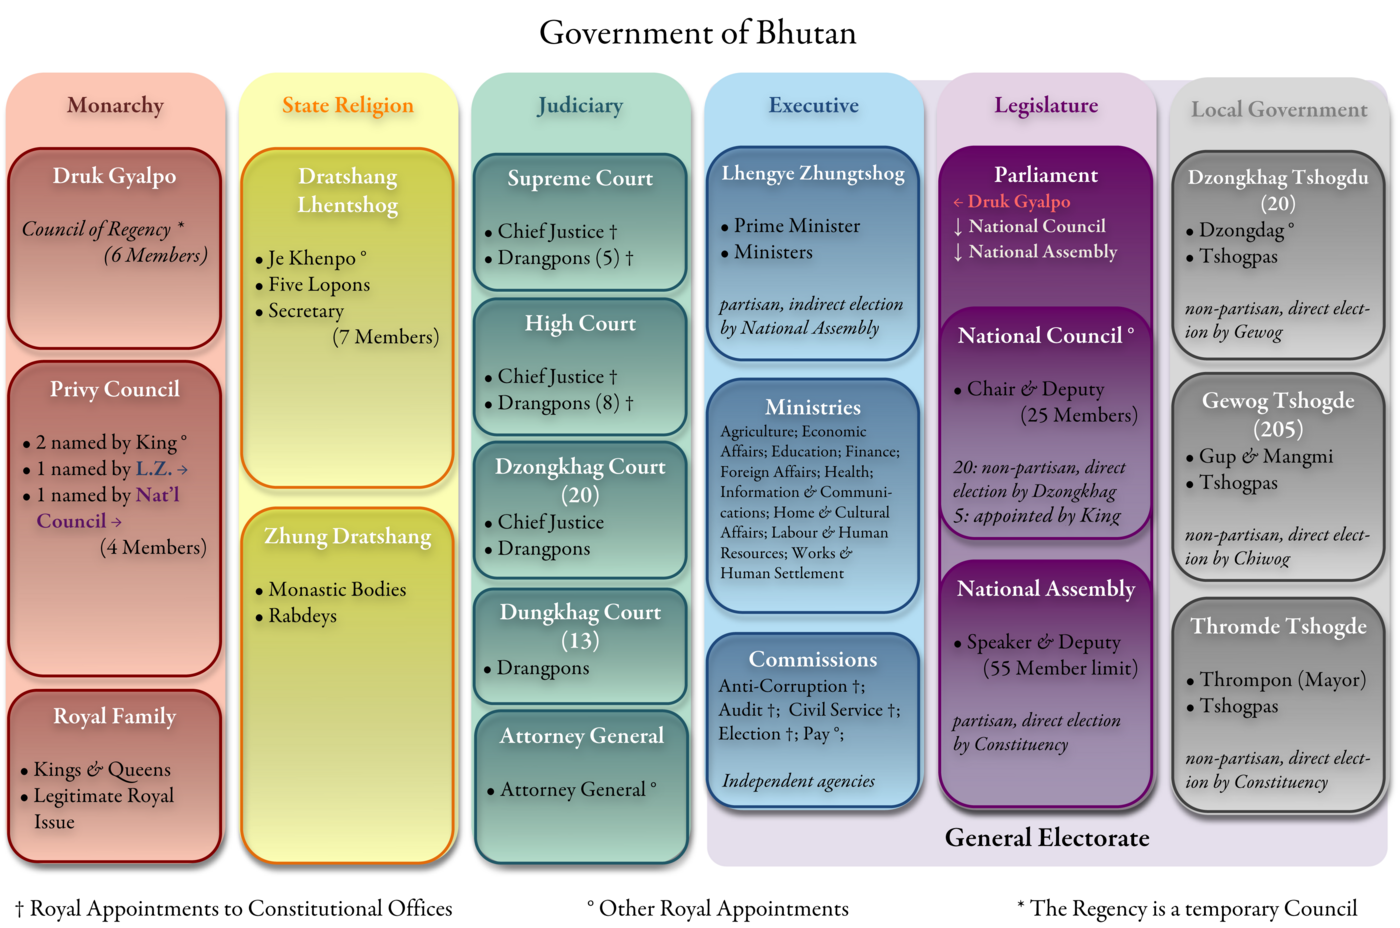 Government of Bhutan under the 2008 Constitution